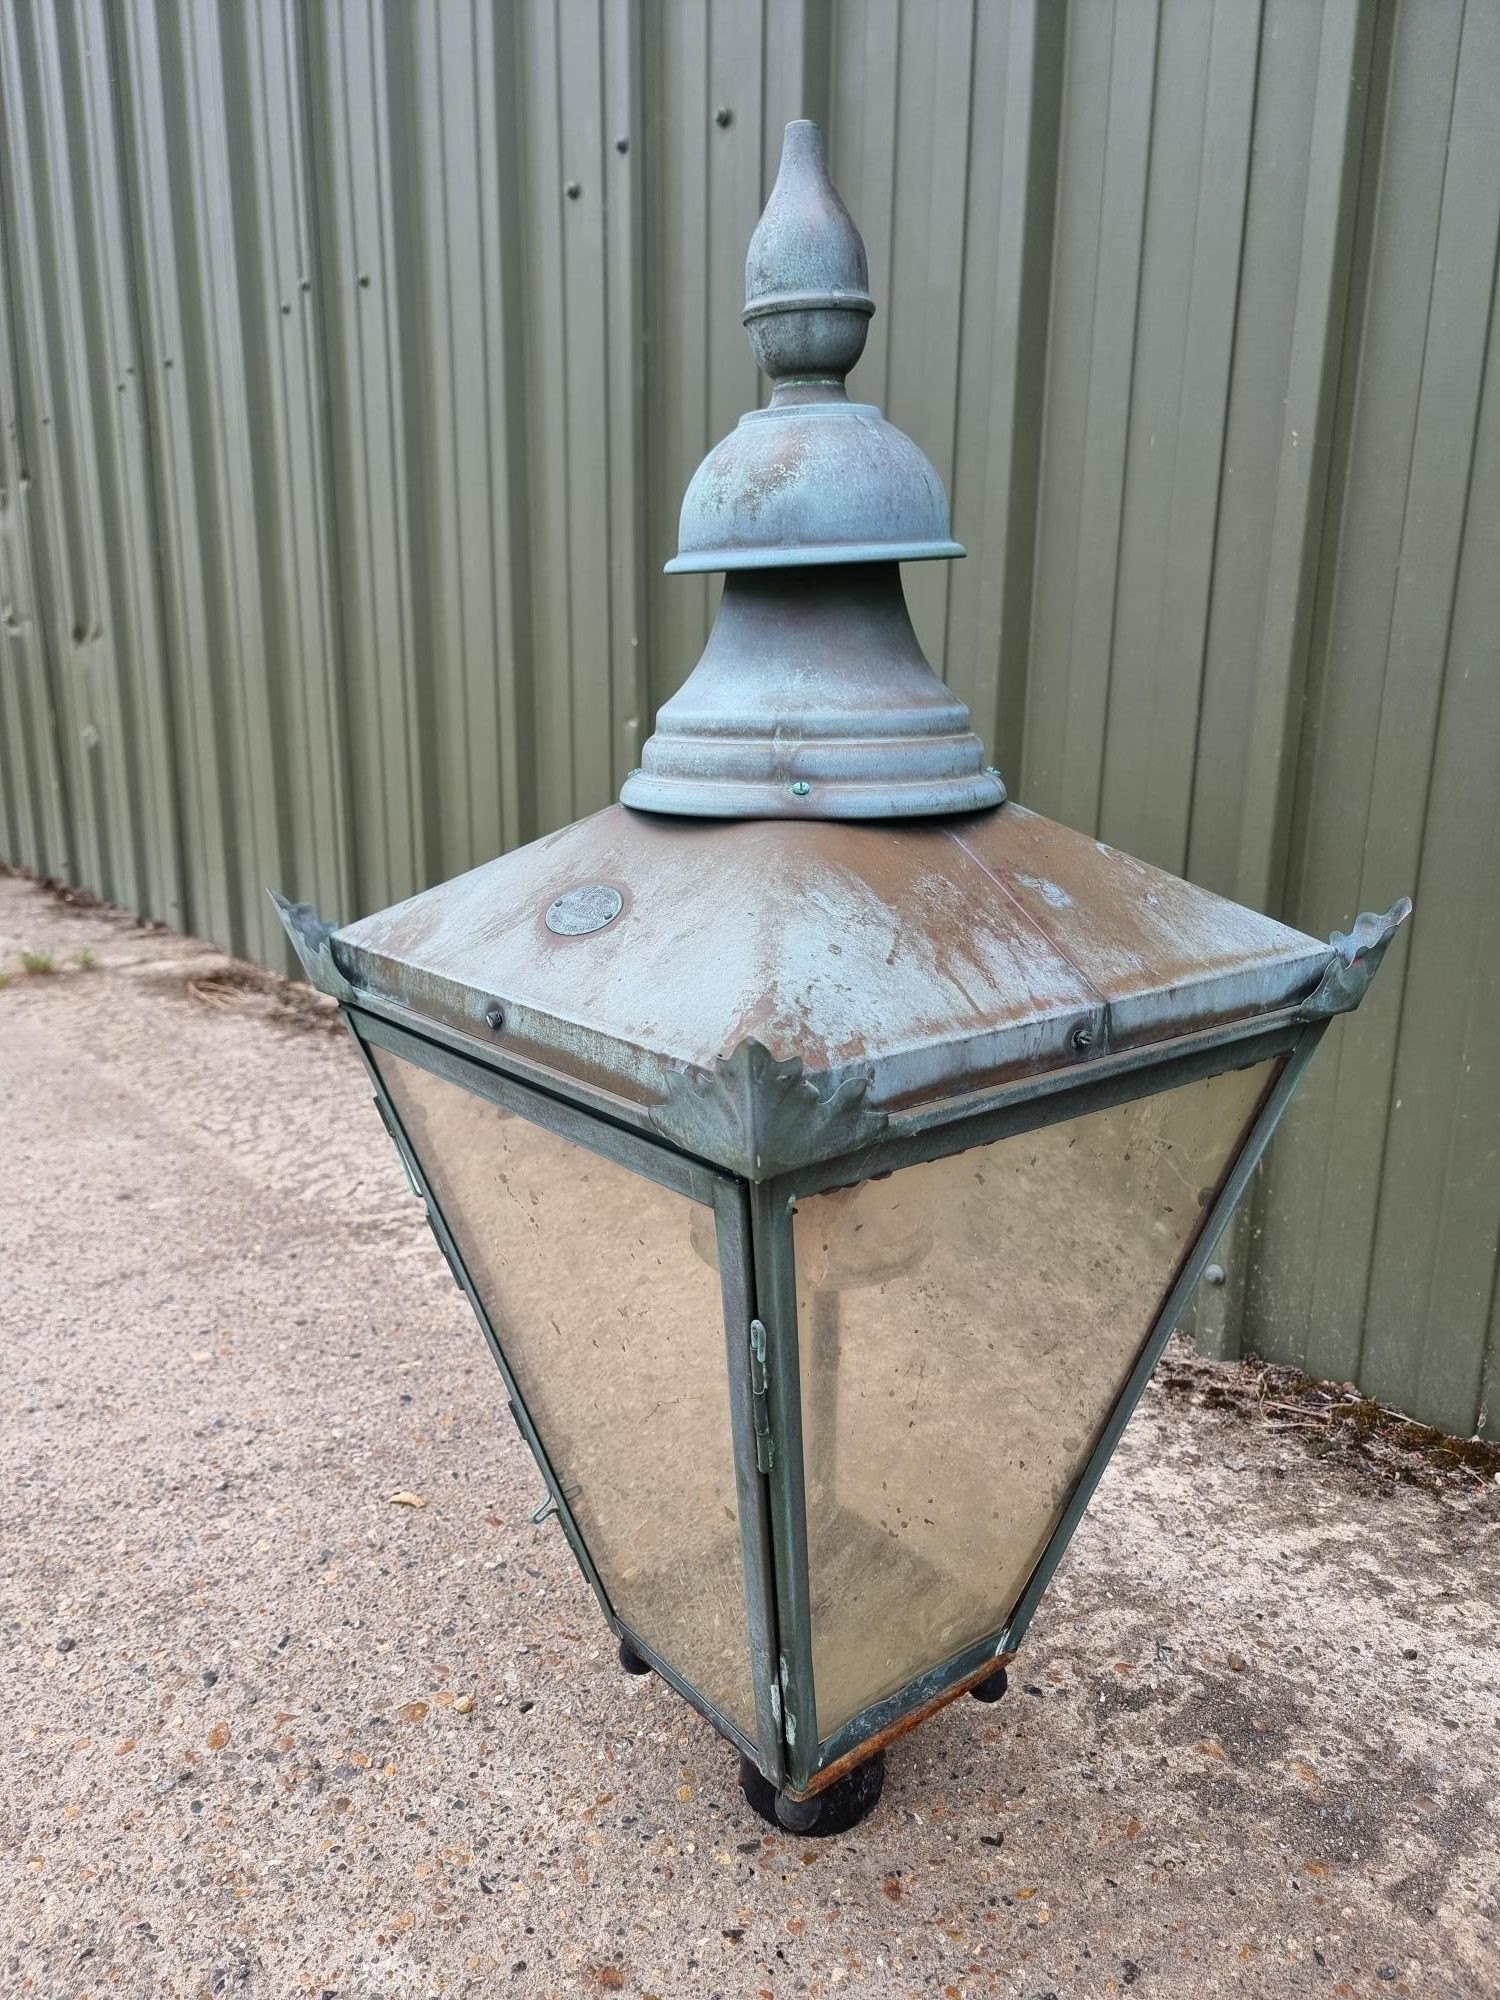 Old DW Windsor “Streets” Light All Copper Construction